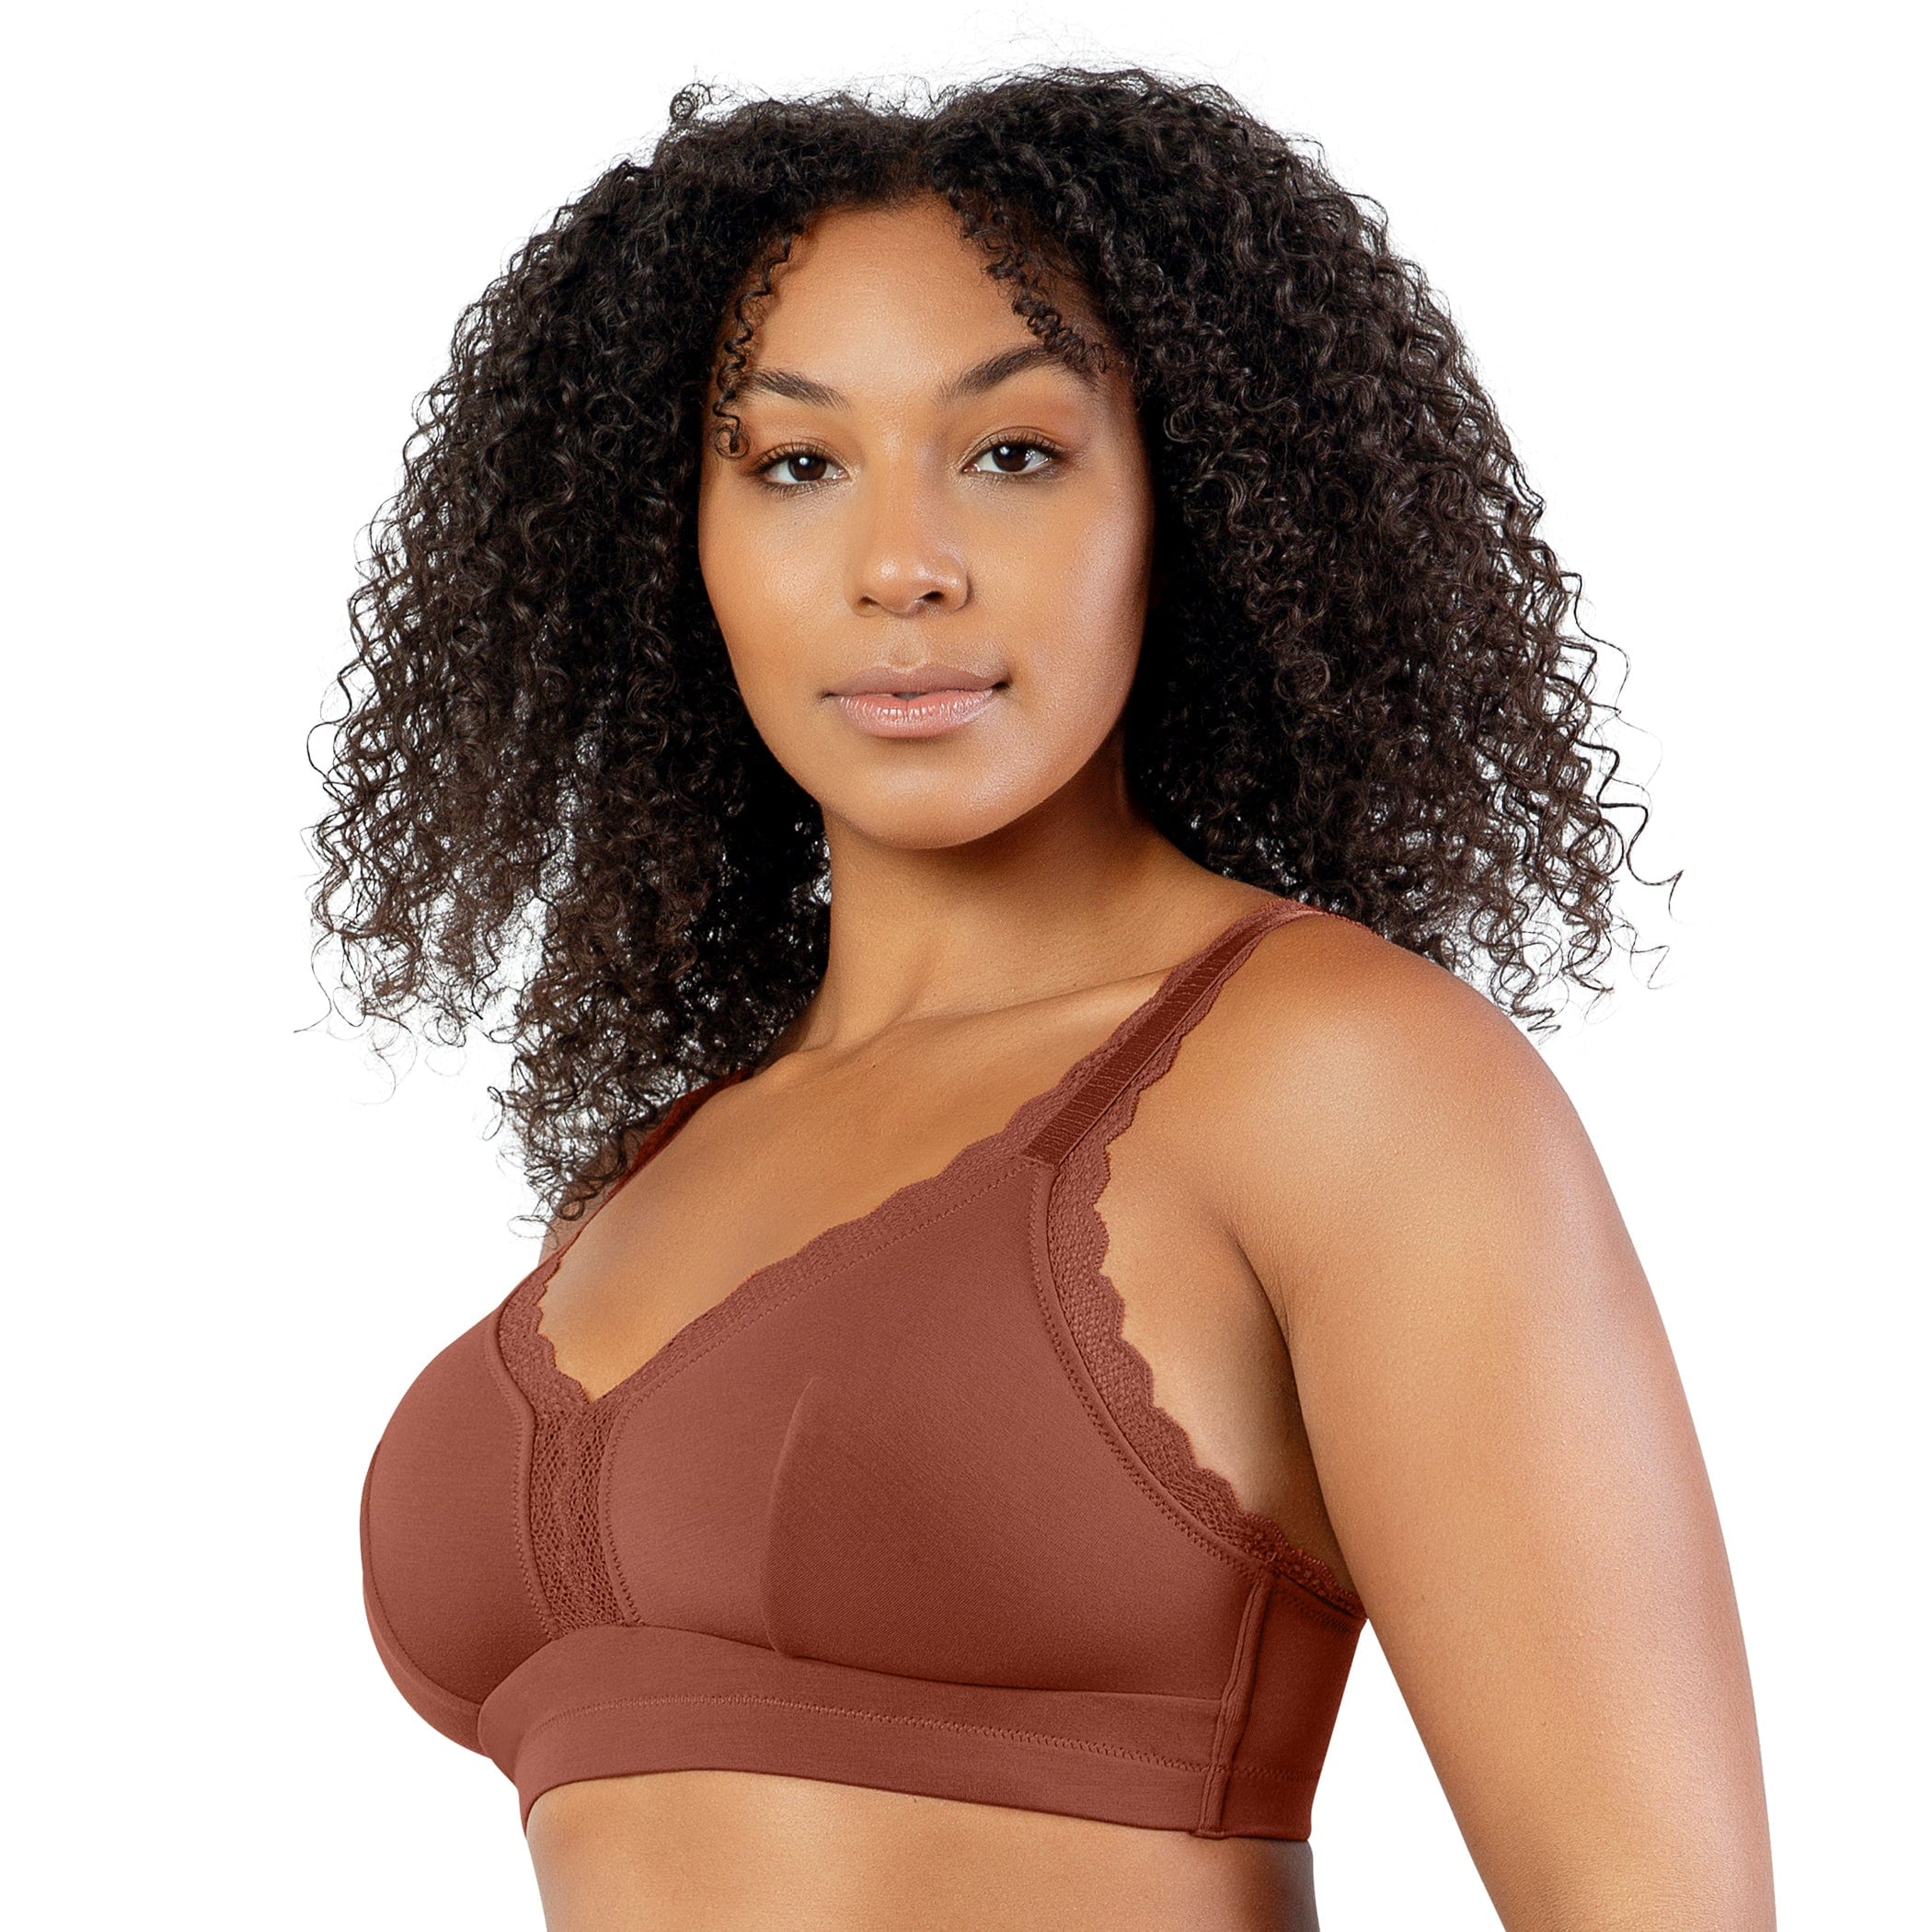 What's The Difference Between Full Busted and Full Figured? -  ParfaitLingerie.com - Blog